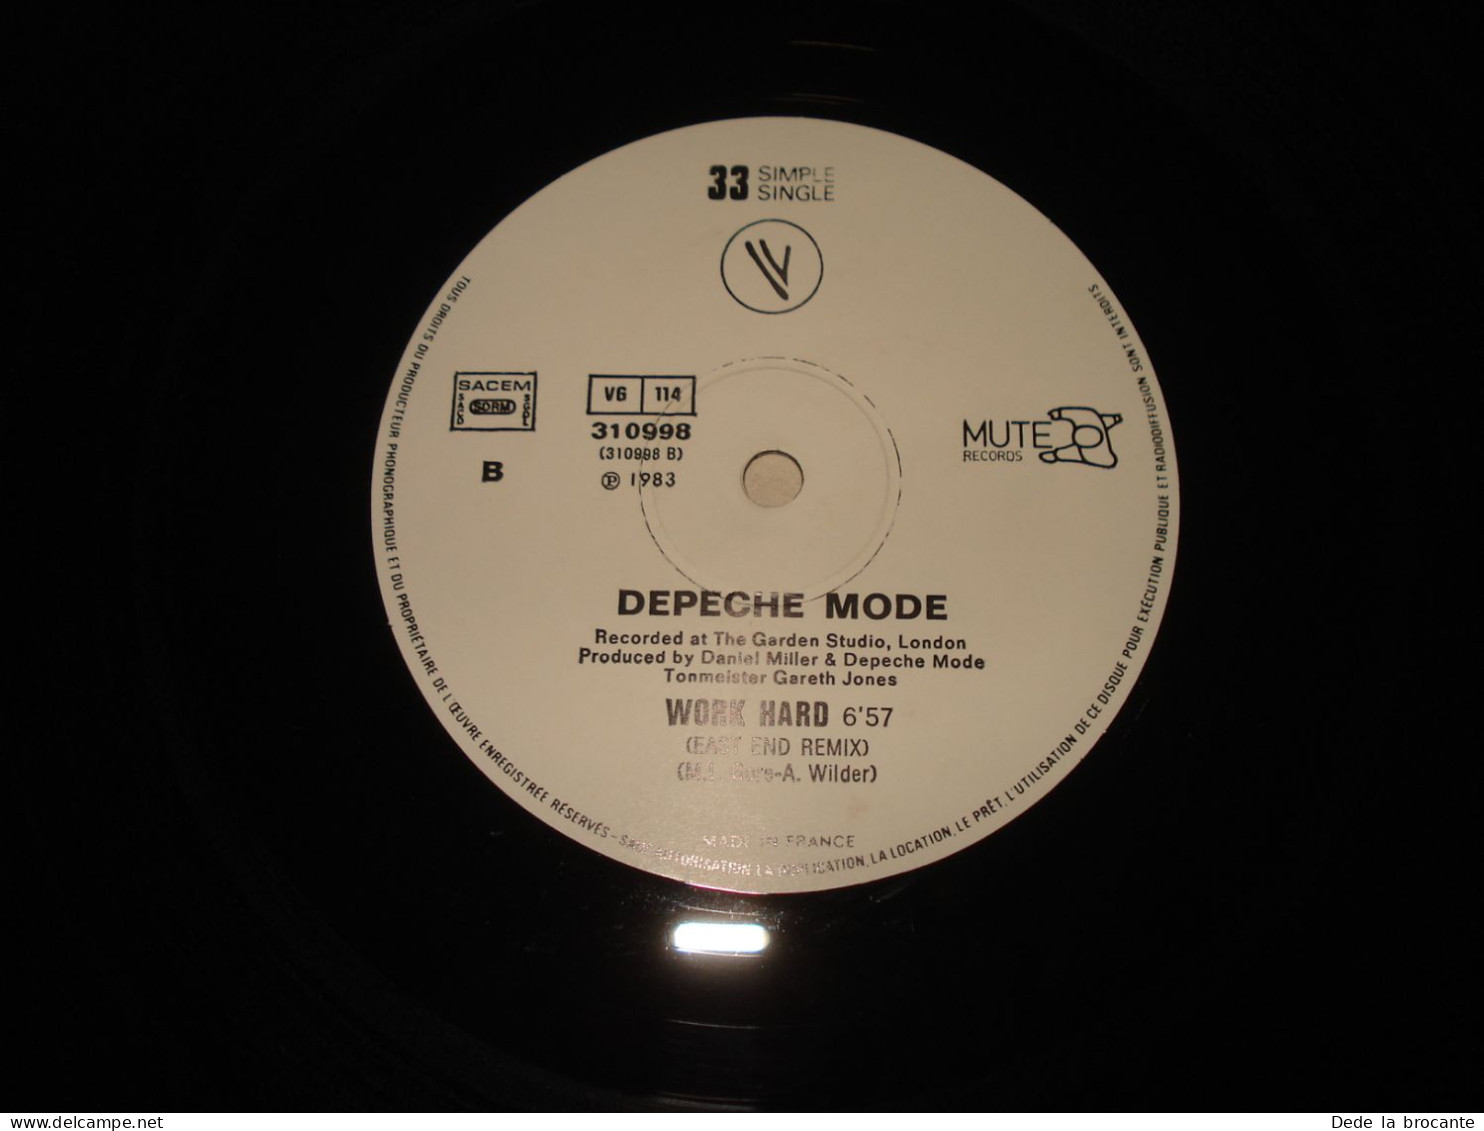 B12 / Depeche Mode – Everything Counts –Maxi Single - Mute - 310998 - FR 1983  NM/NM - Formatos Especiales